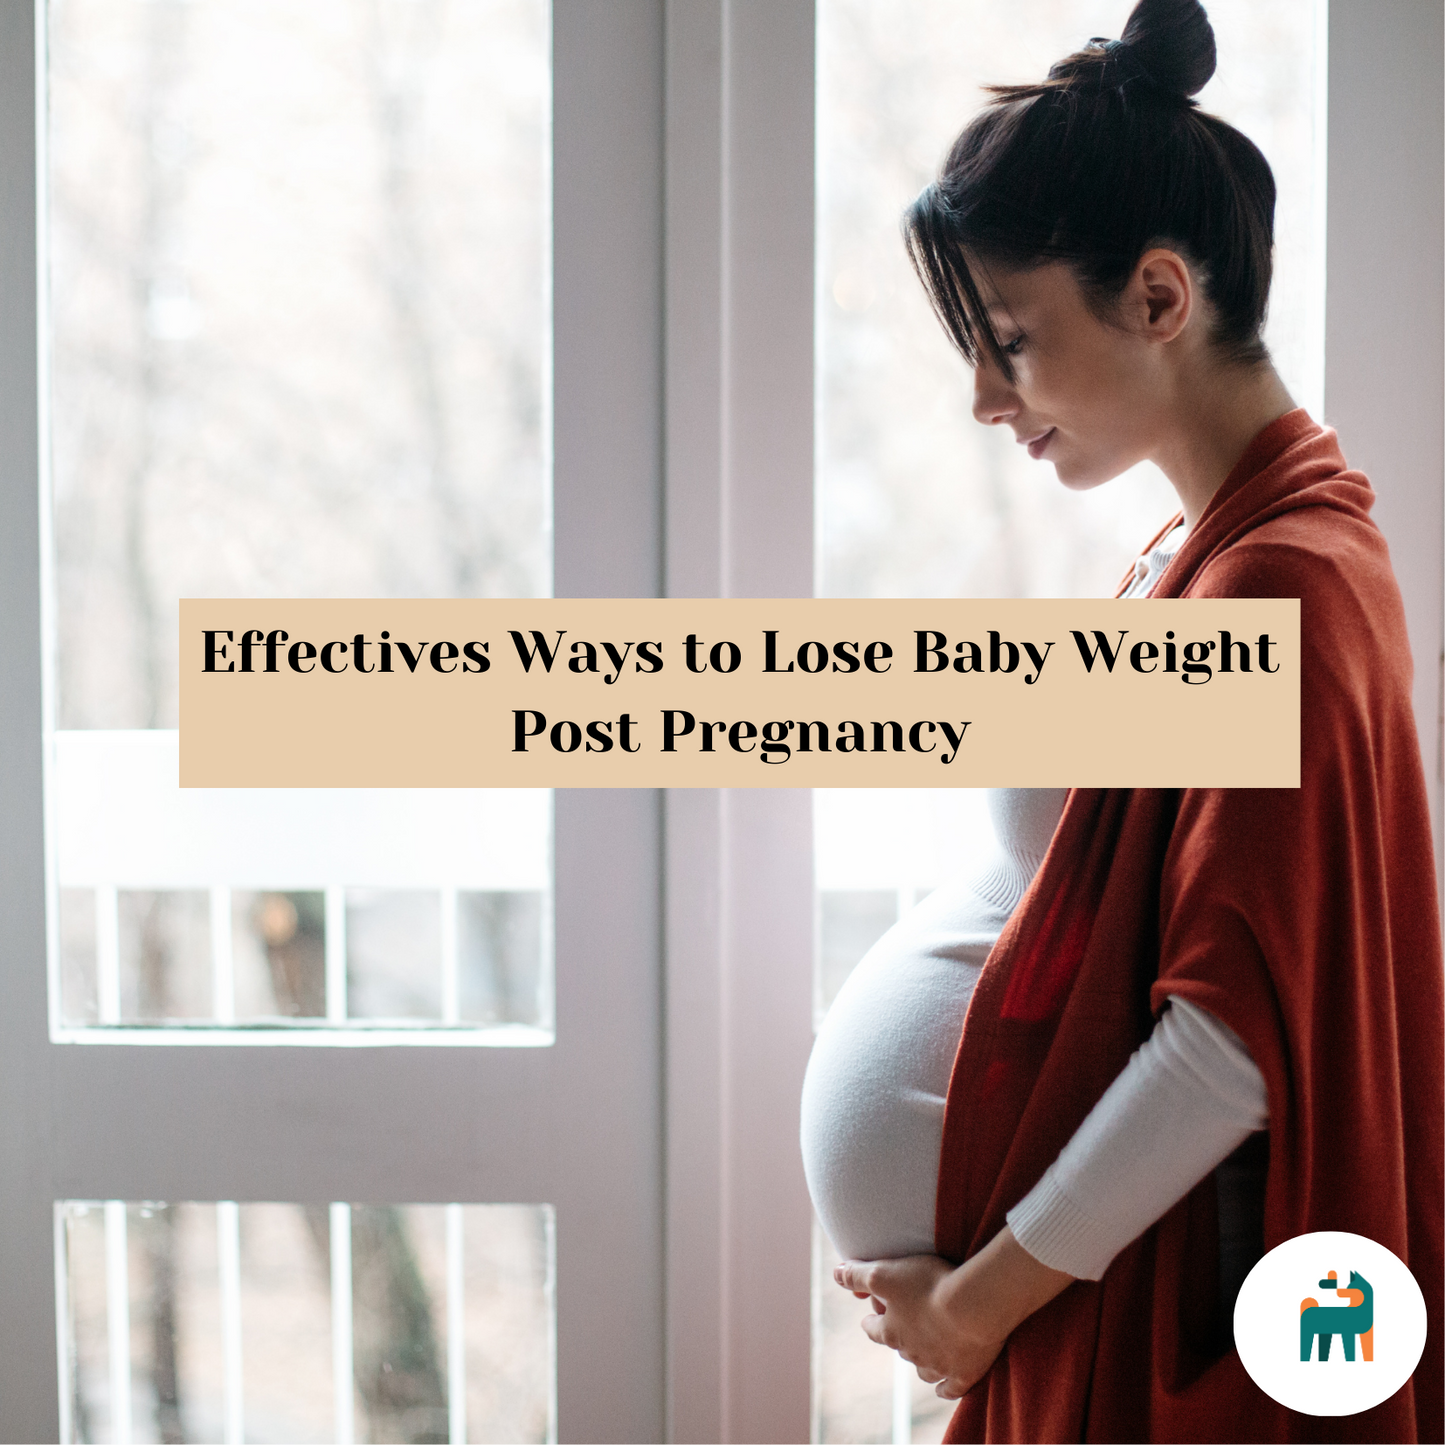 Effectives Ways to Lose Baby Weight Post Pregnancy